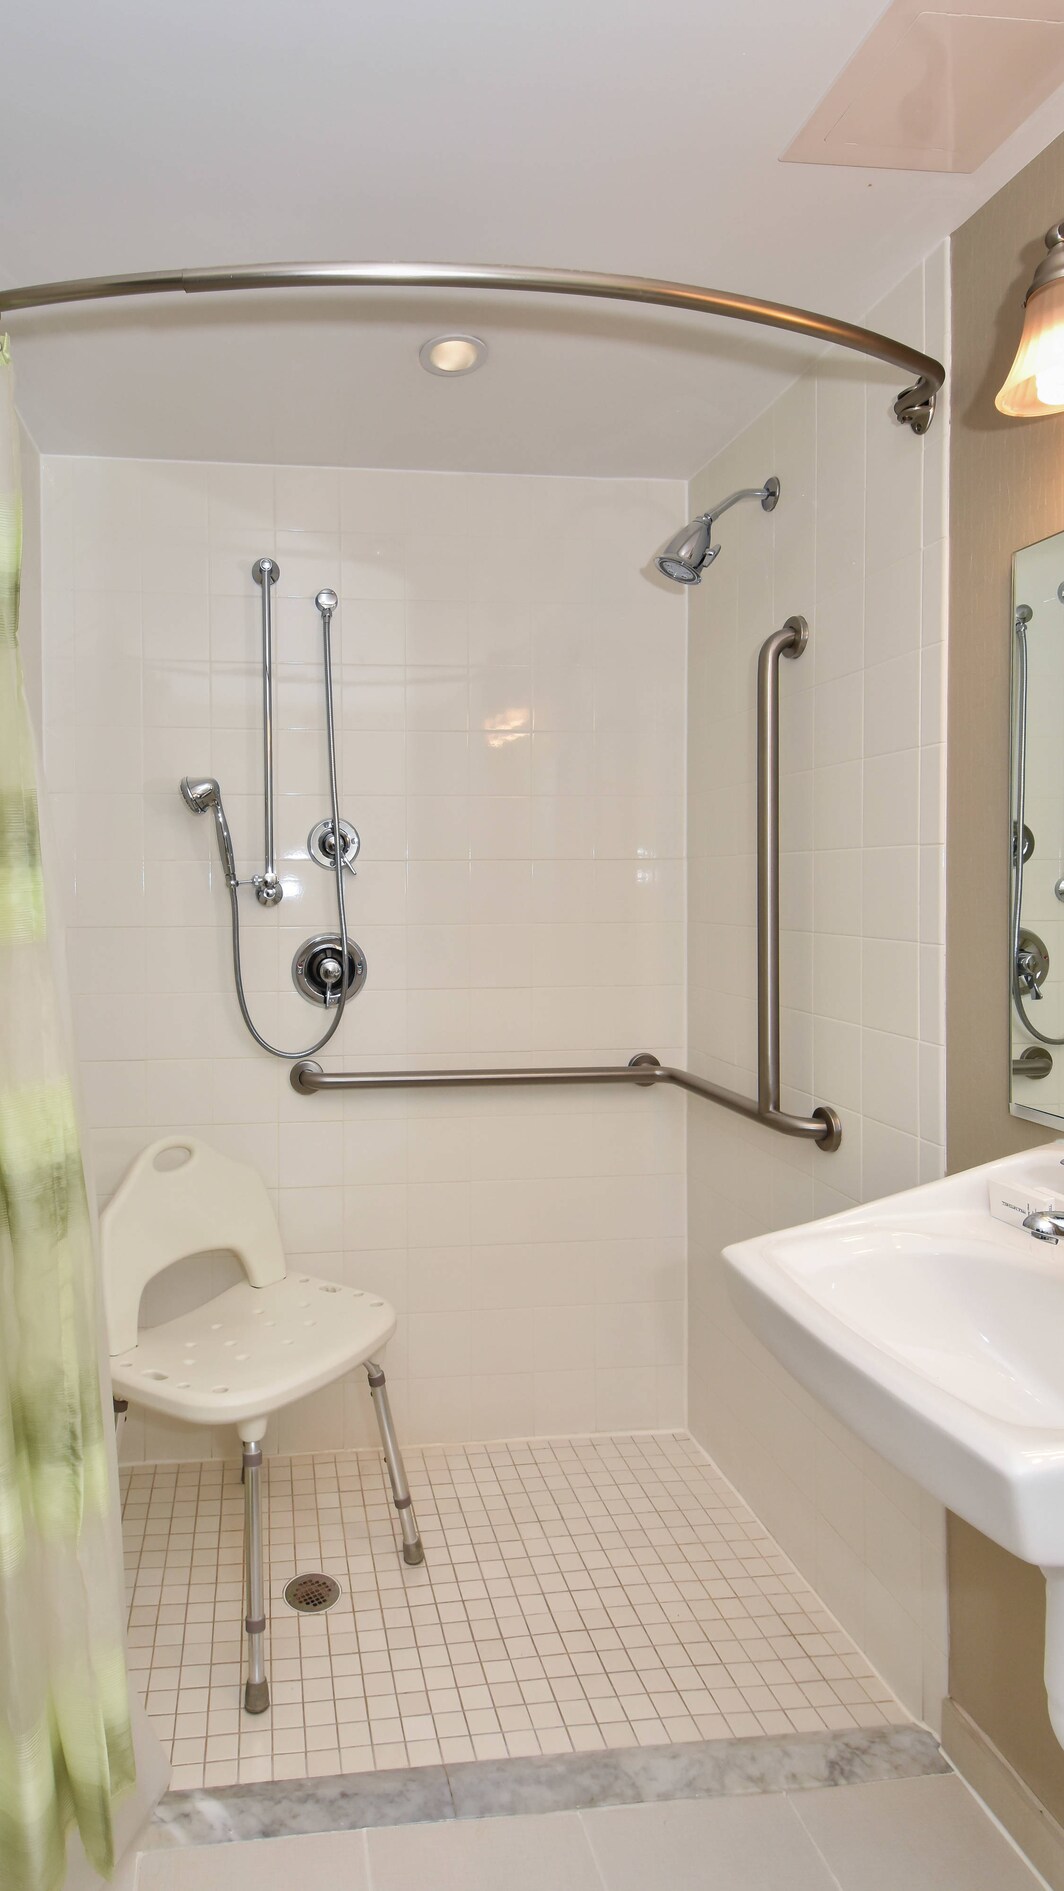 Accessible Bathrooms - Roll-in Shower